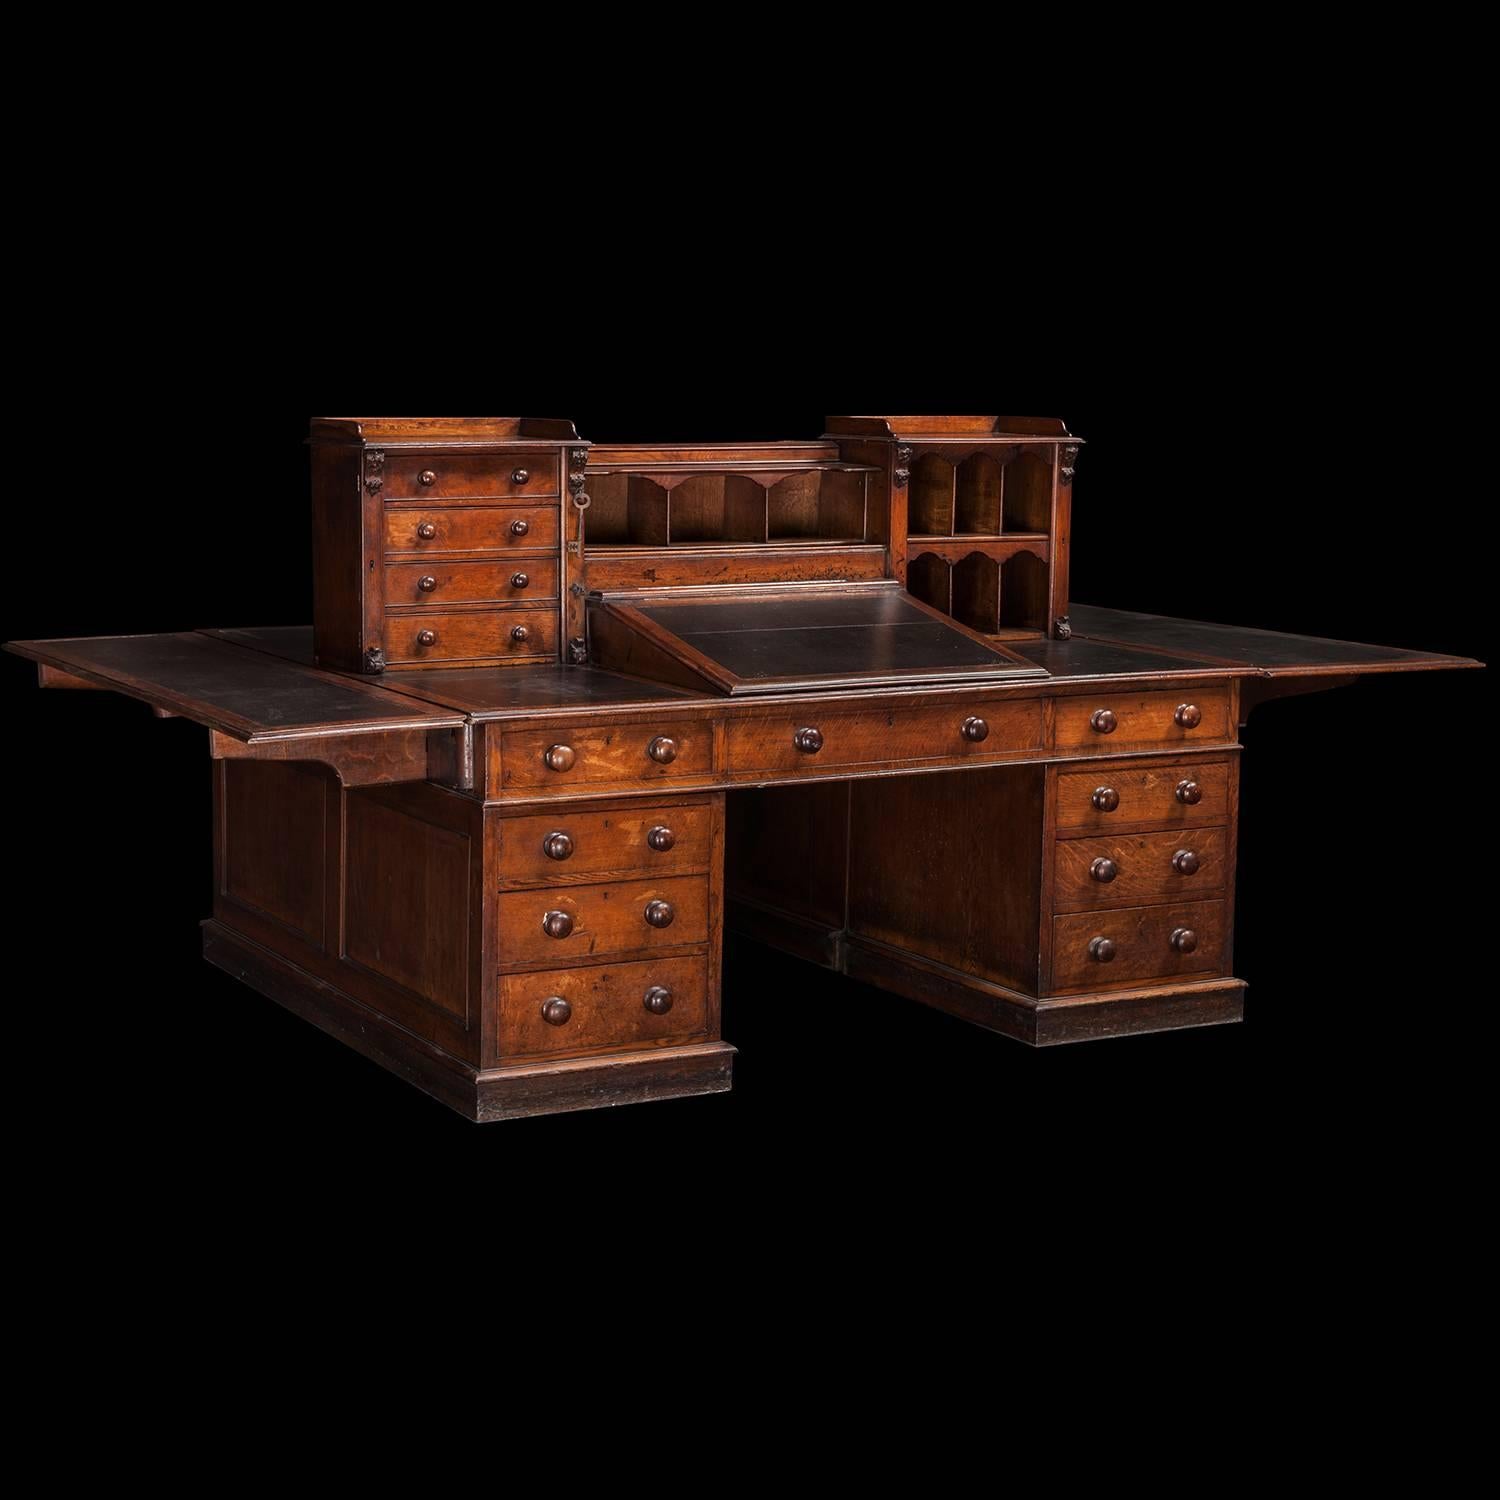 Incredible oak partners desk, with black leather inserts, and folding leaves. Wonderfully intricate and functional desk, custom made for a railway office just outside Gillows.